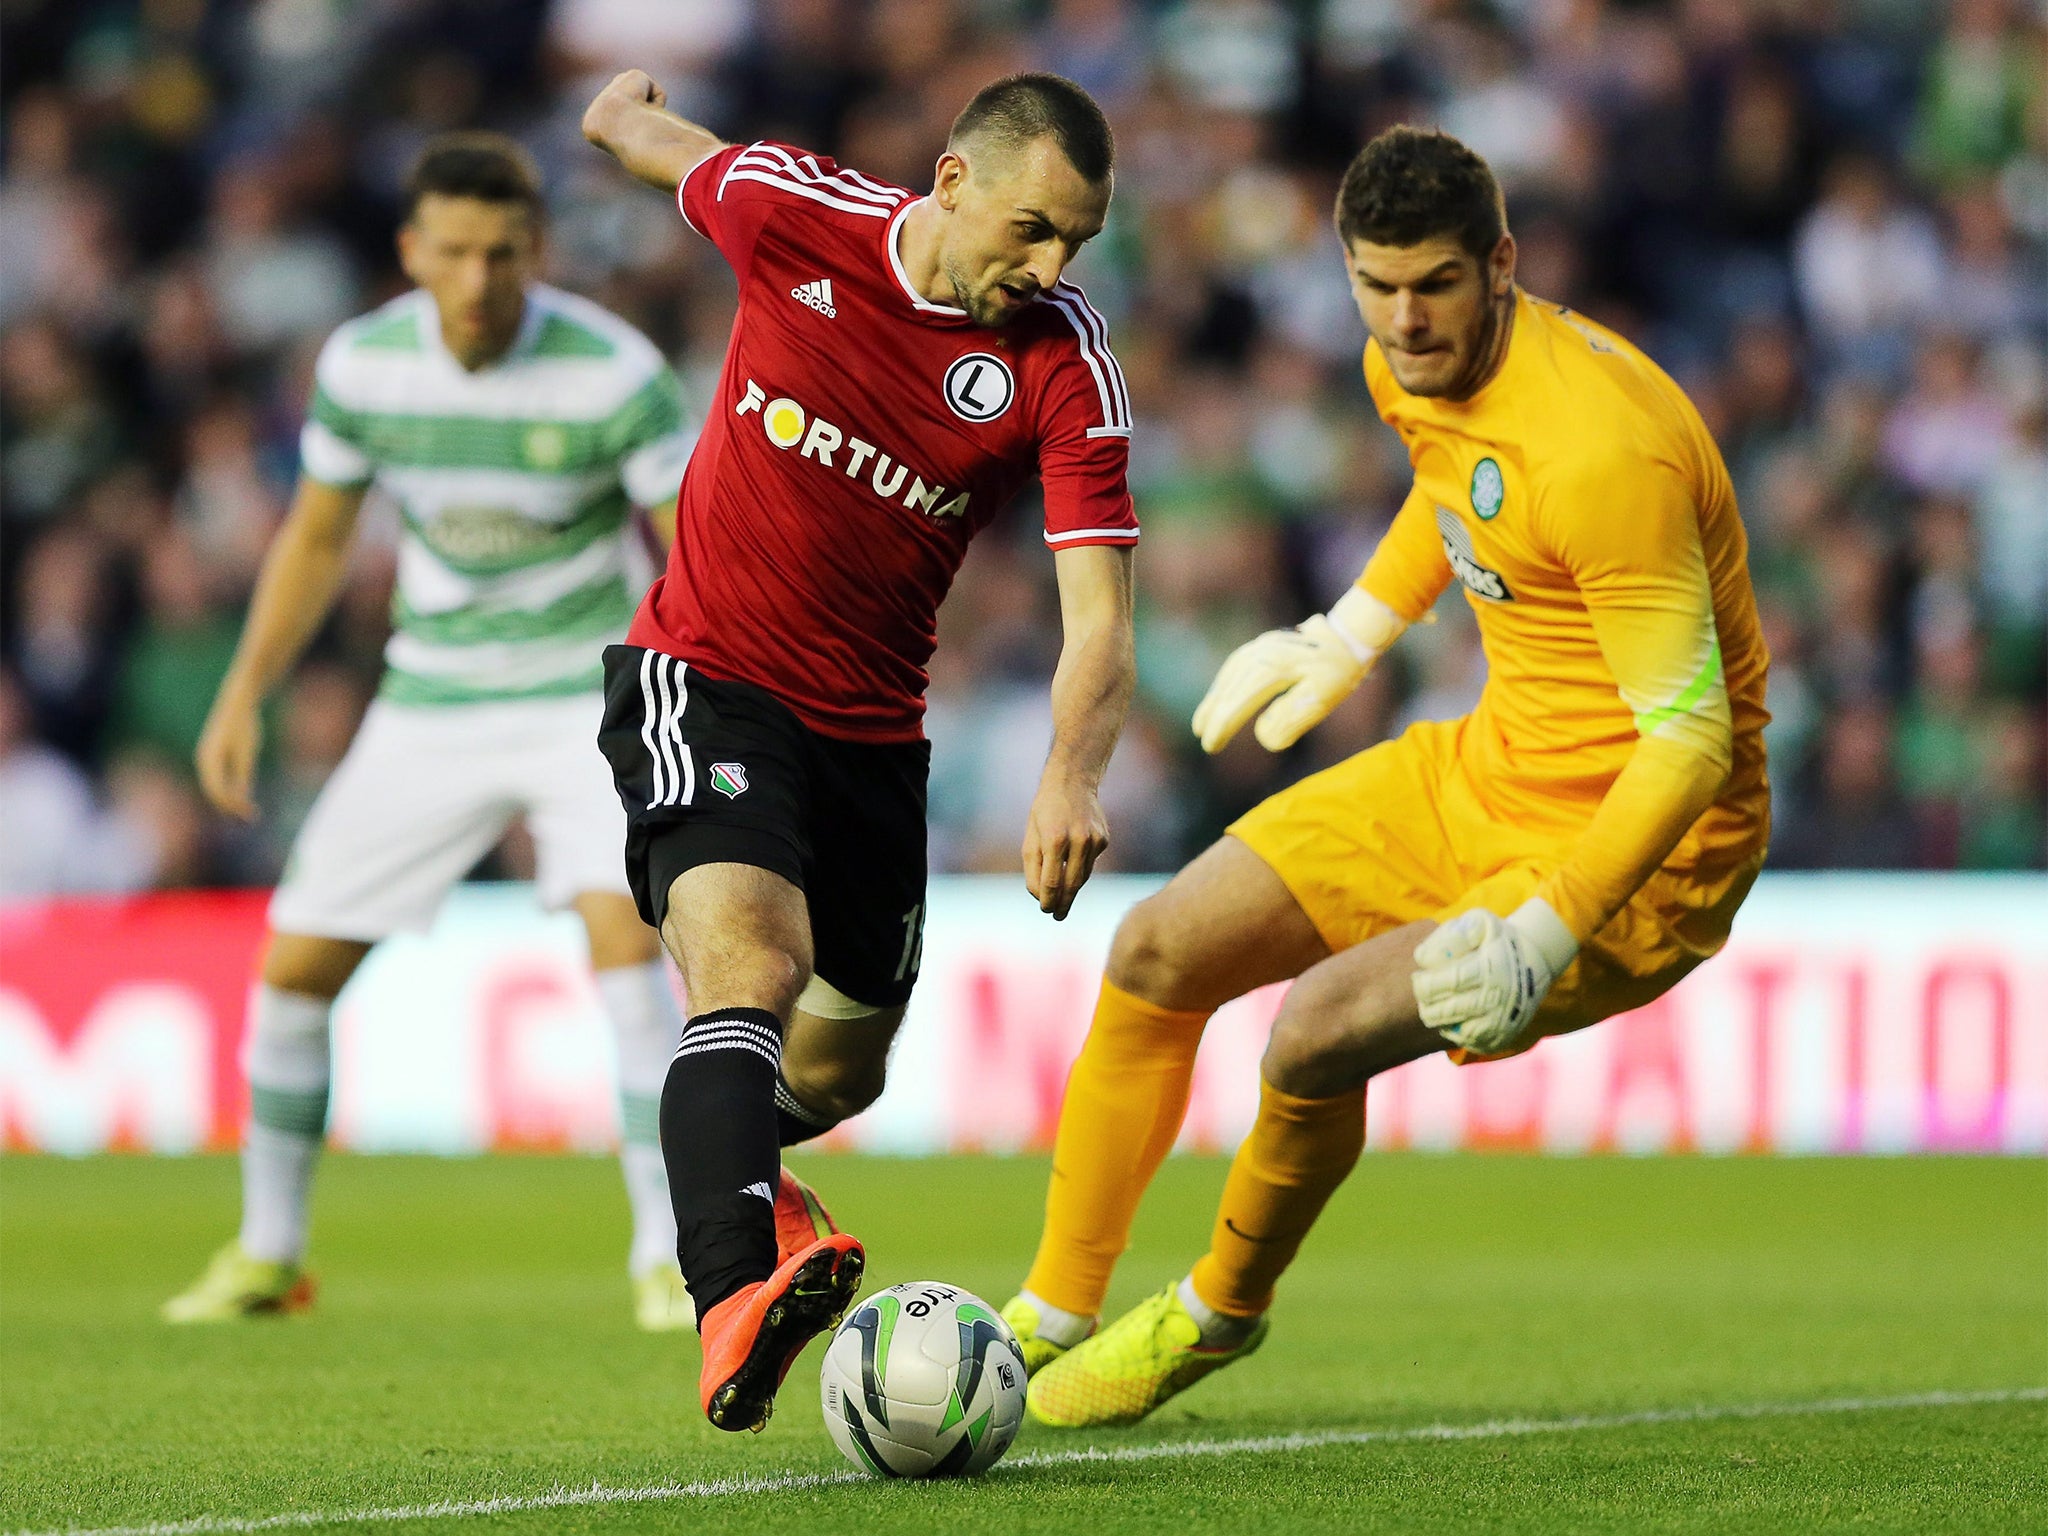 Michal Kucharczyk beats Celtic keeper Fraser Foster for Legia’s second goal